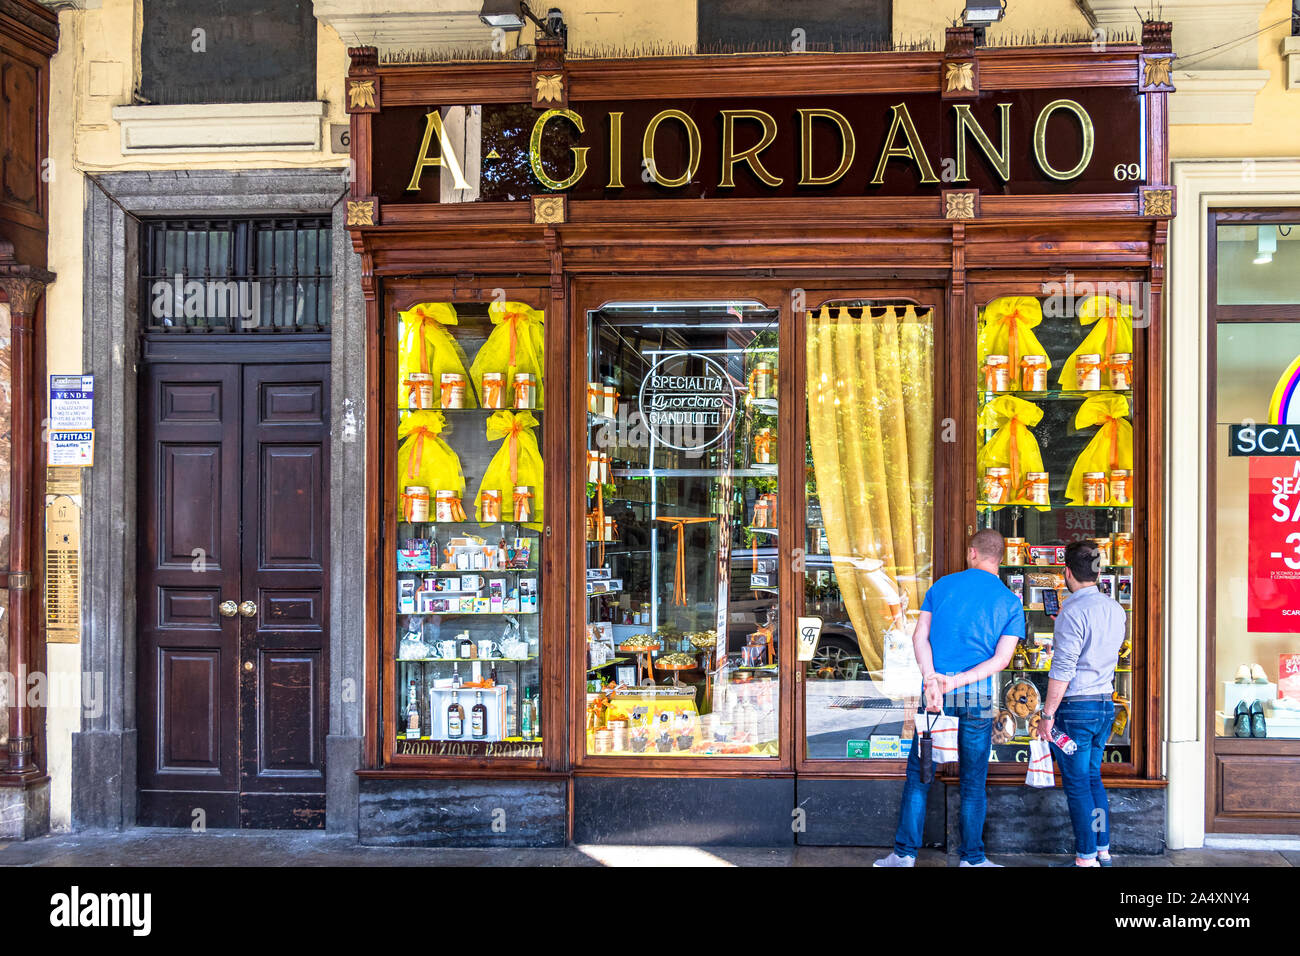 People outside A. Giordano chocolate shop under the porticoes in Turin’s Piazza Carlo Felice A. Giordano chocolate company was established in 1897 Stock Photo